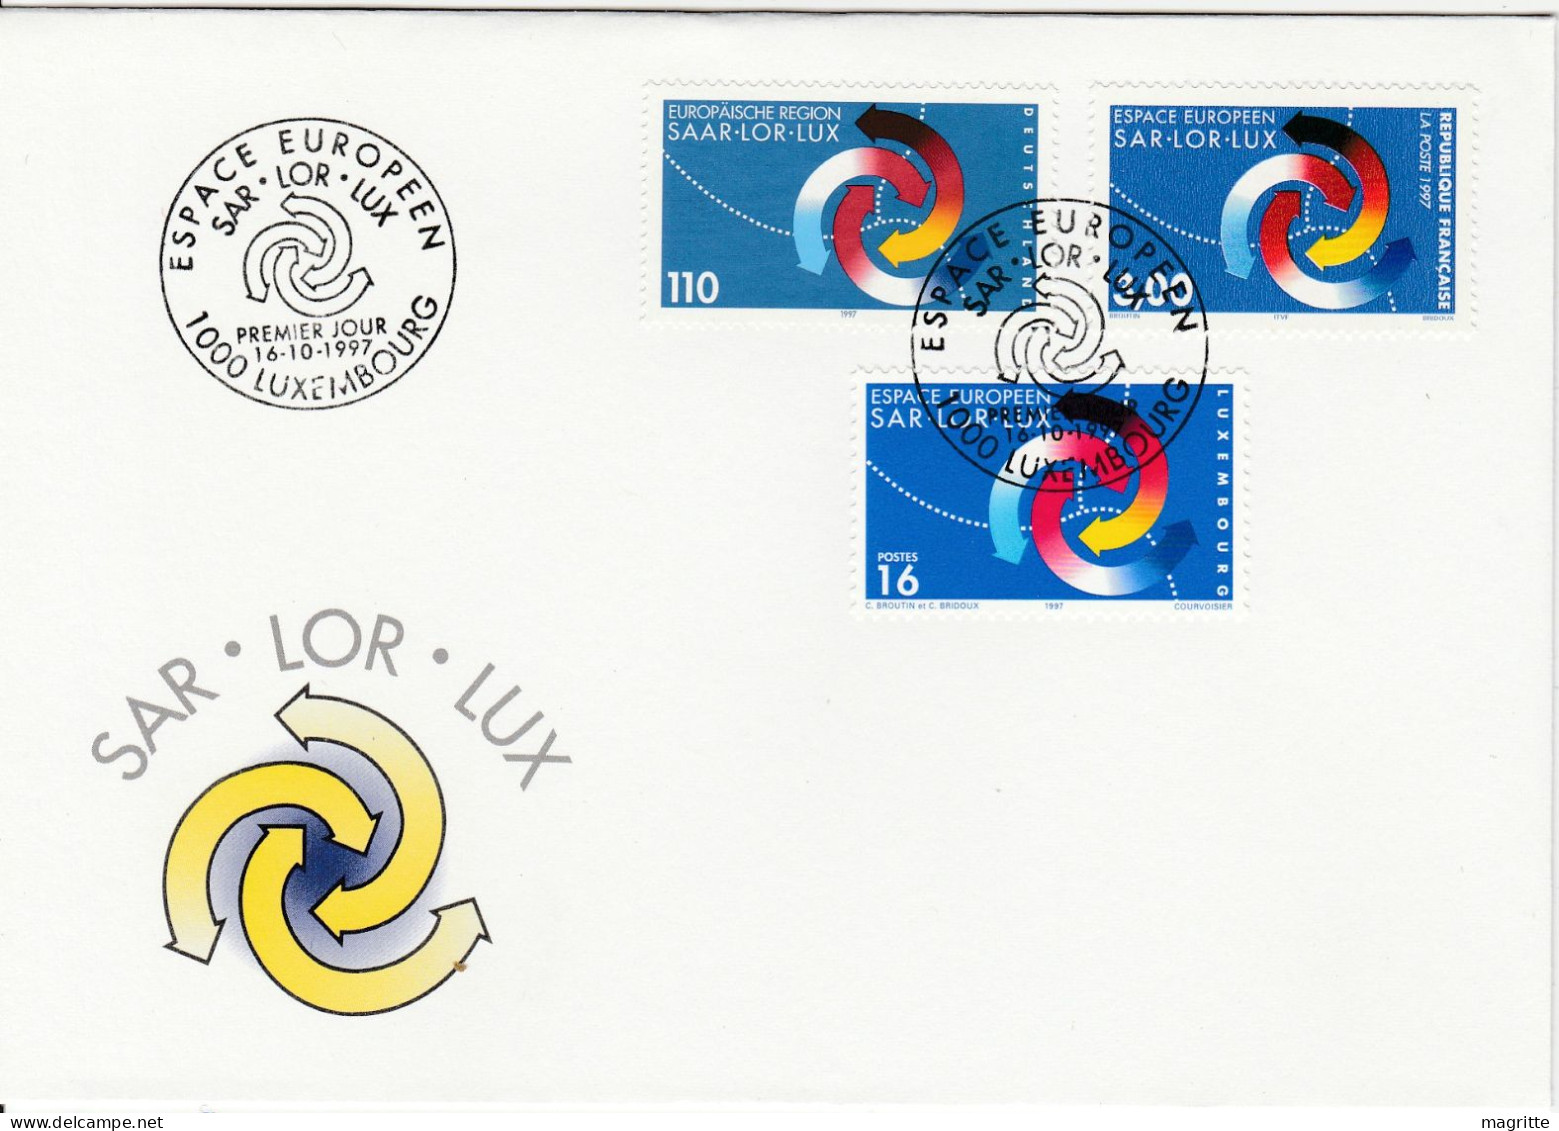 France Allemagne Luxembourg 1997 FDC Mixte Emission Commune Sar-Lor-Lux Germany Luxembourg Saar Lor Lux Joint Issue - Emisiones Comunes